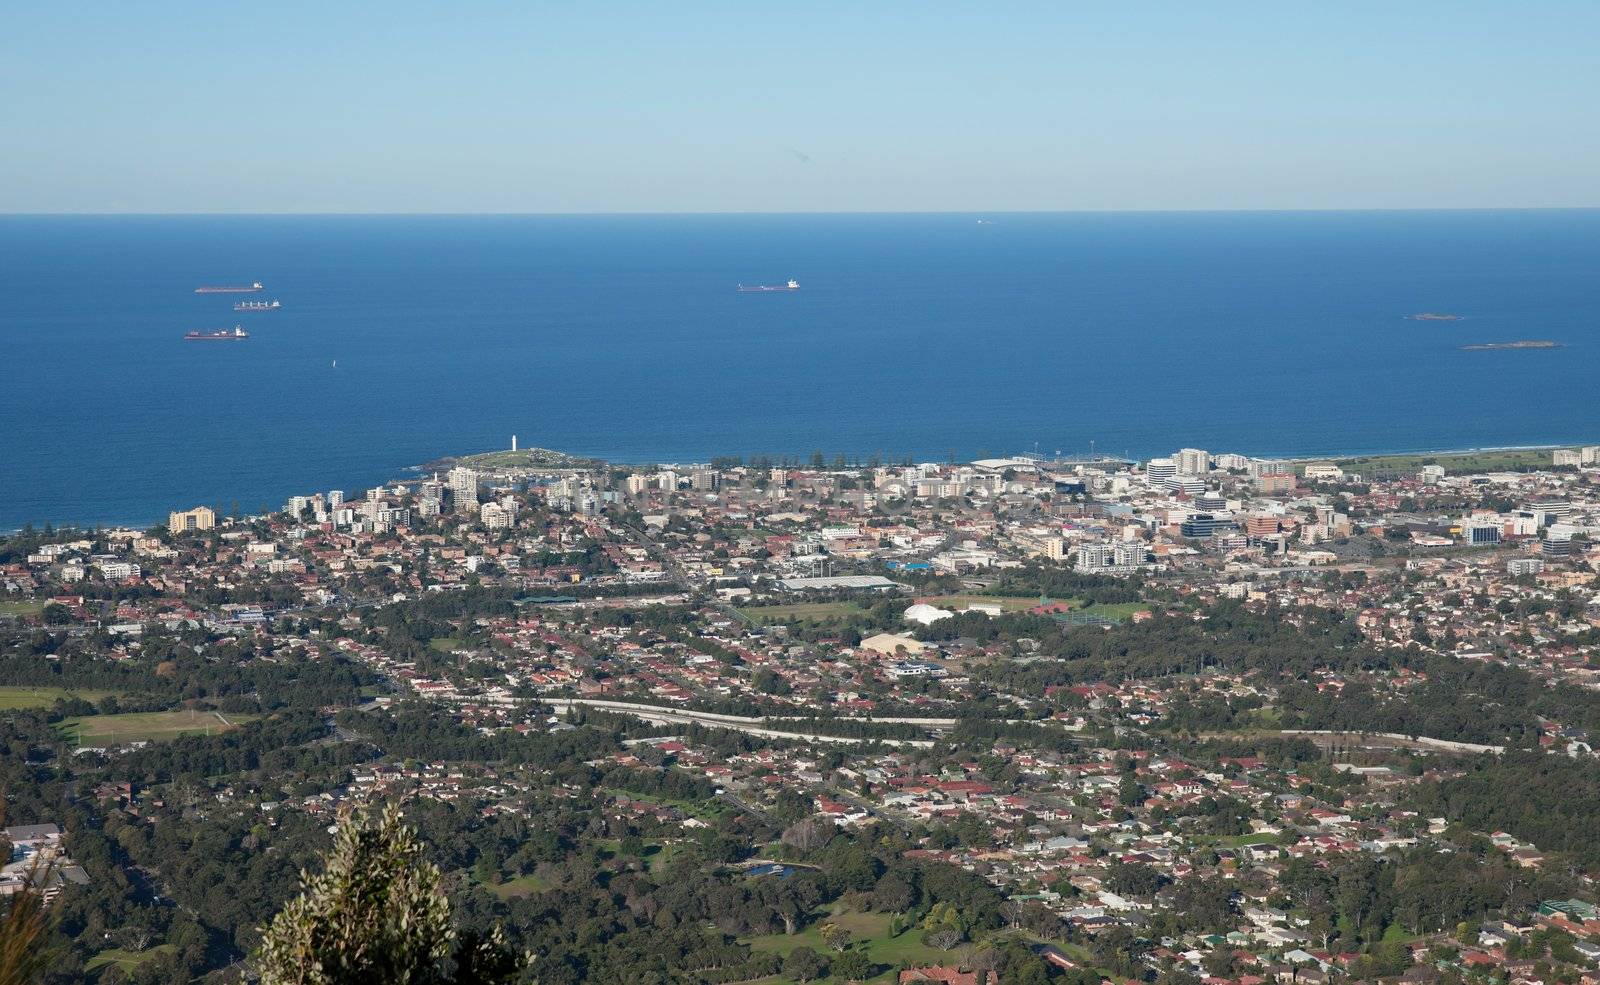 looking down onto wollongong city and suburbs